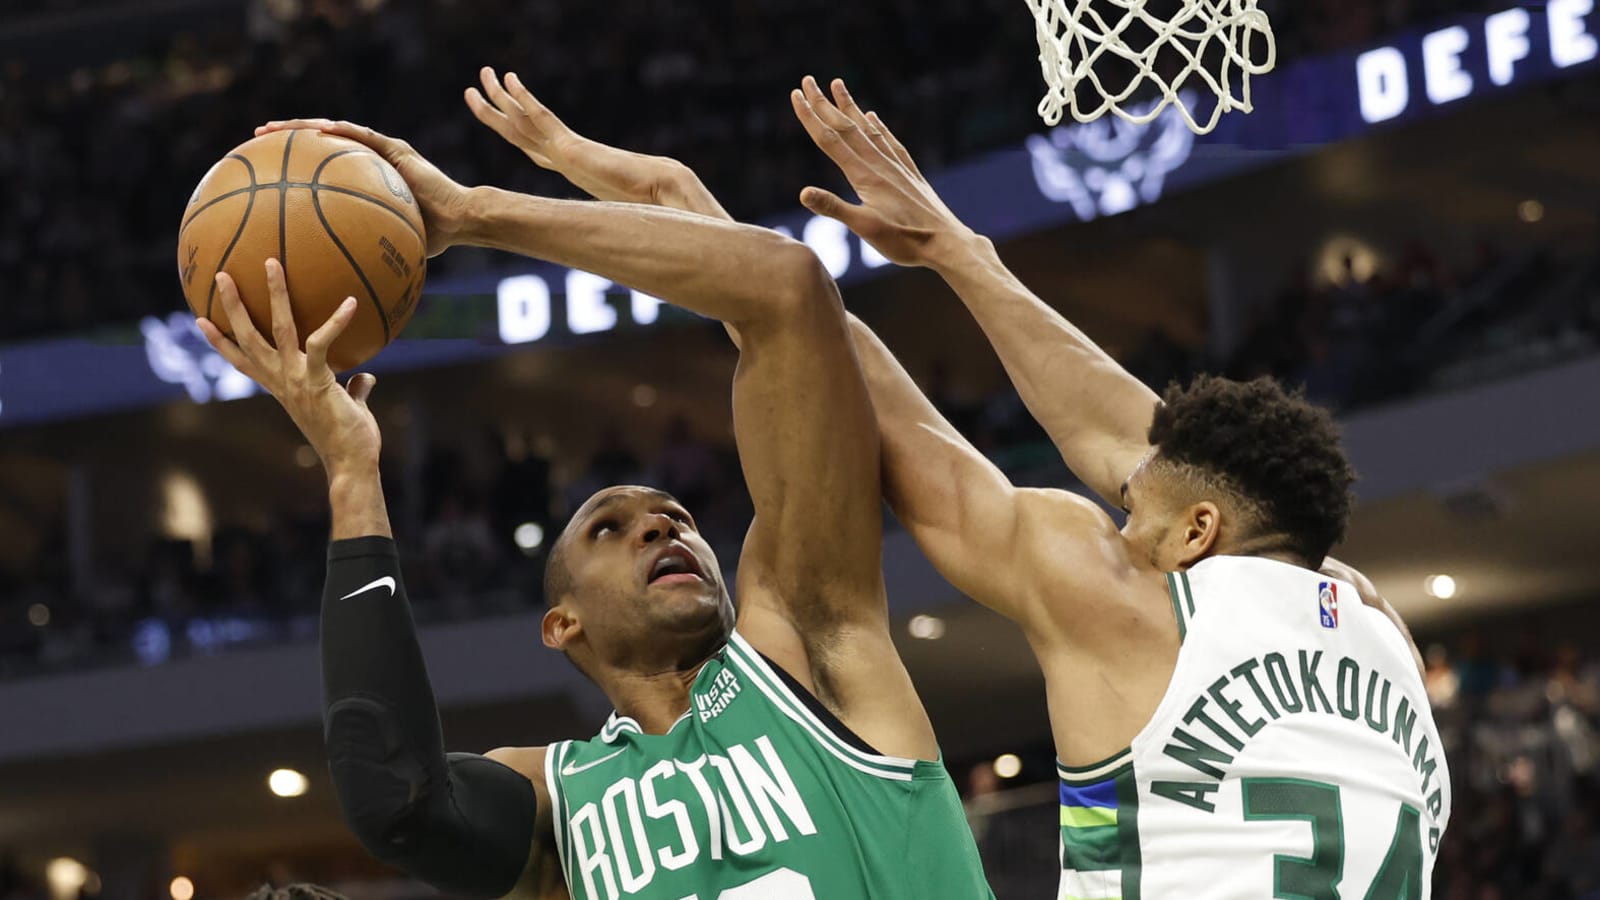 Watch: Horford dunks on Giannis, draws tech afterwards